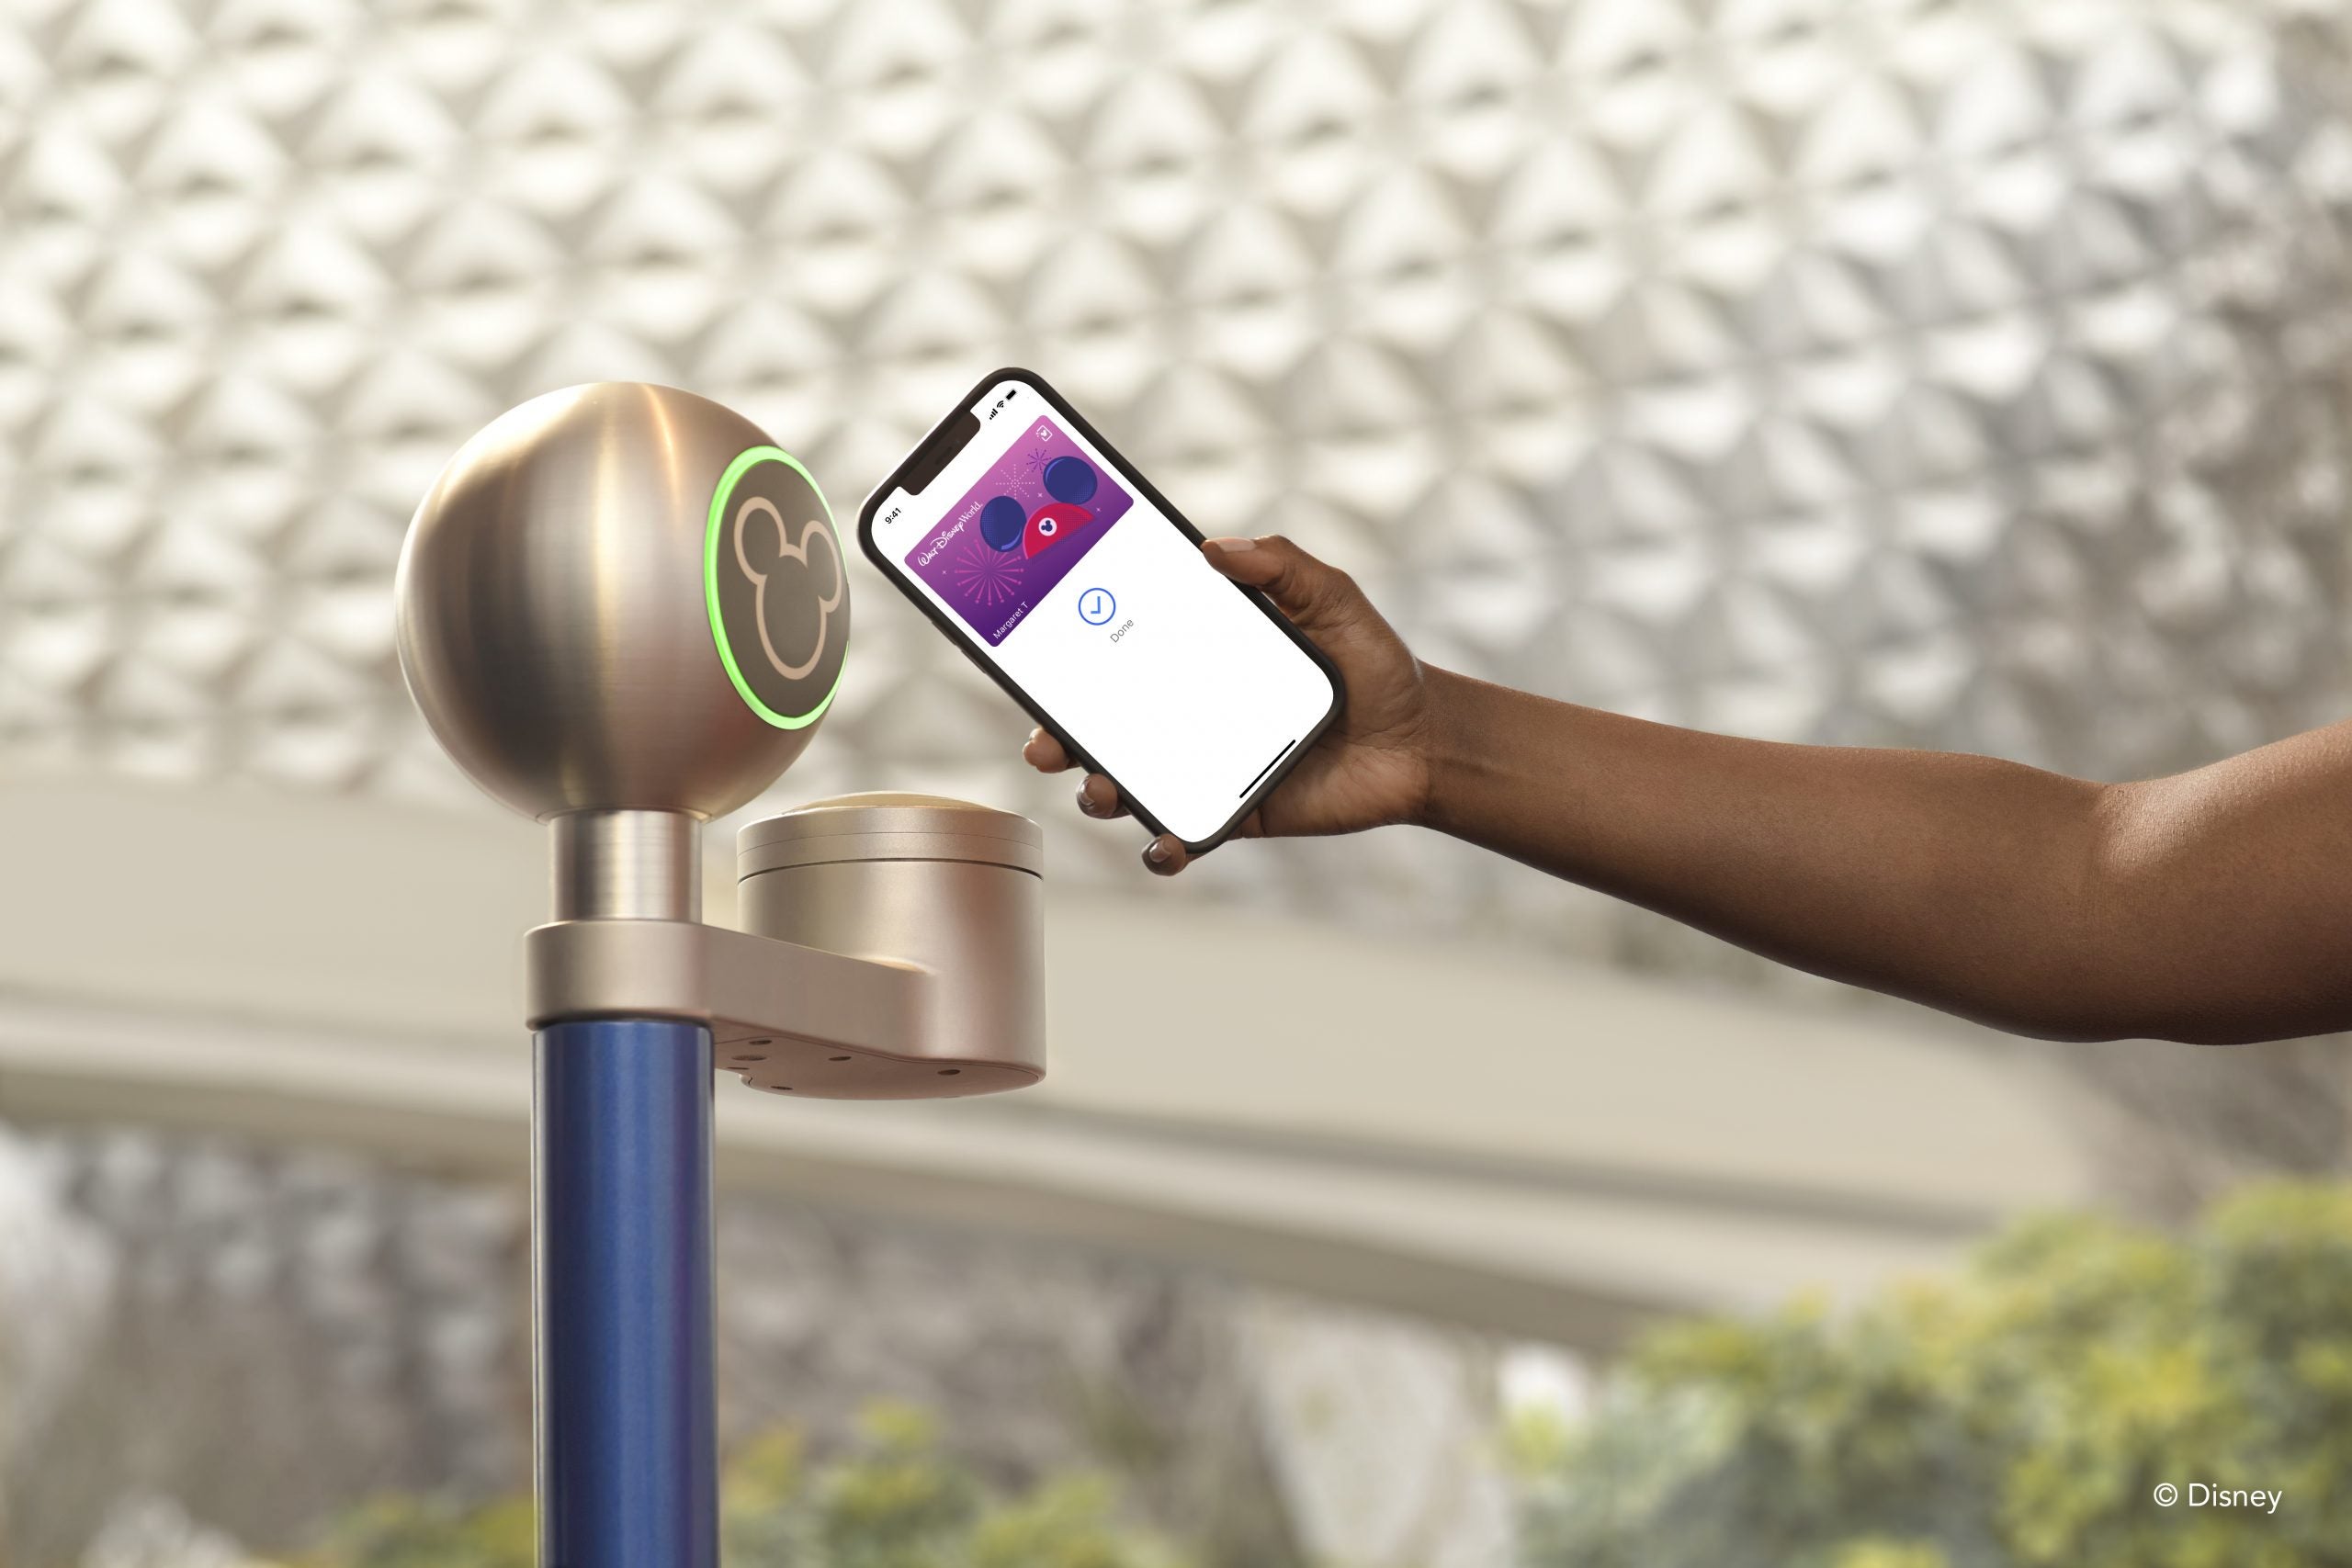 Magic Bands not required: Disney World introduces new technology to enter the parks